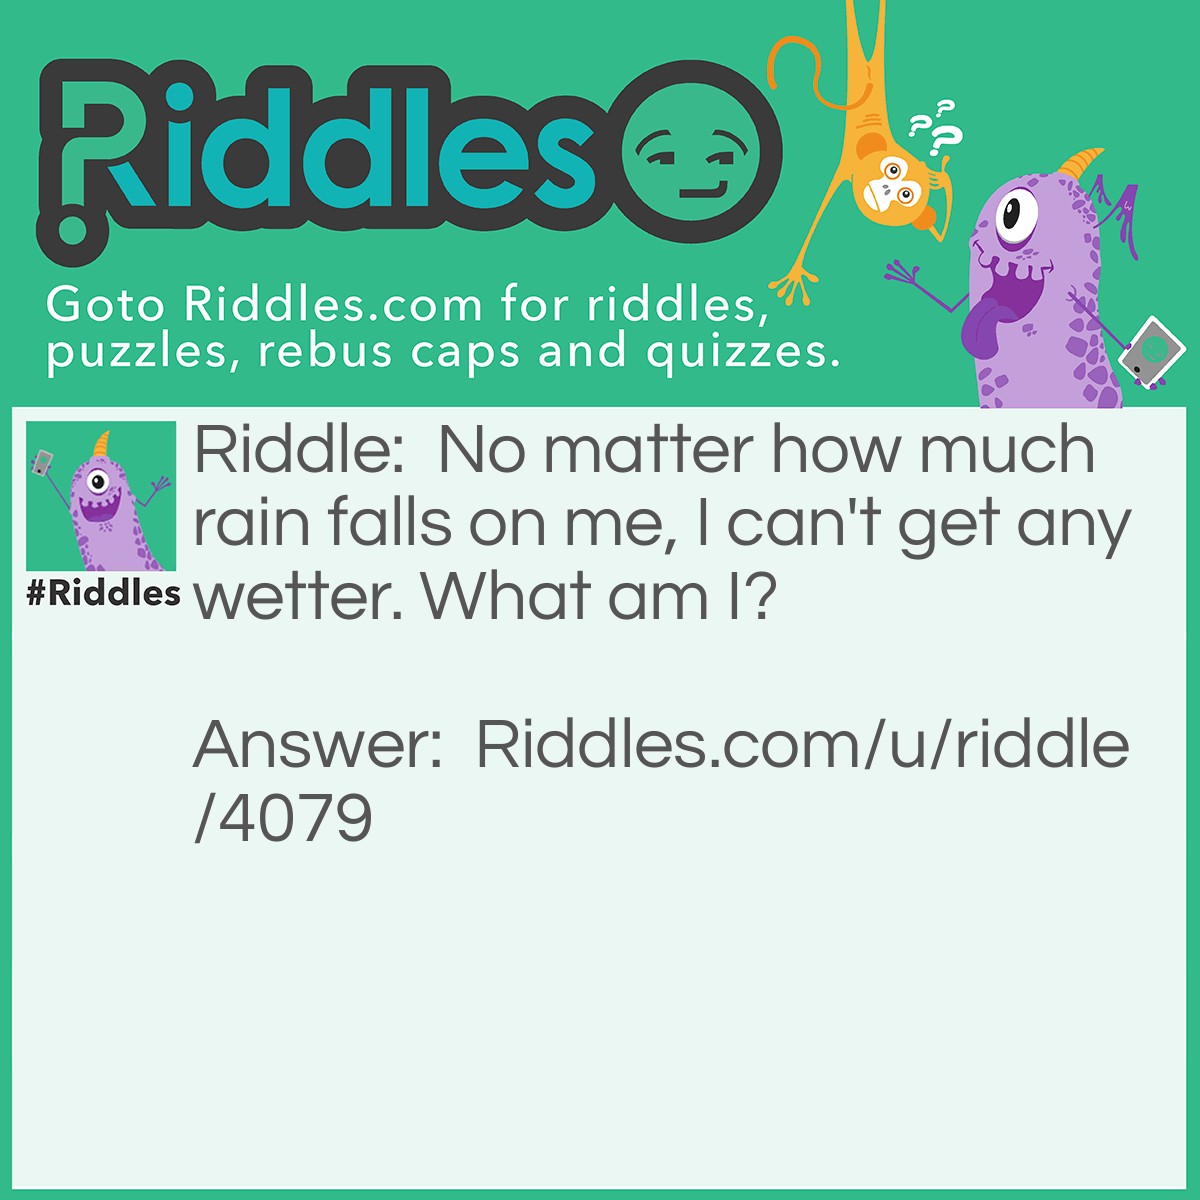 Riddle: No matter how much rain falls on me, I can't get any wetter. What am I? Answer: Water.